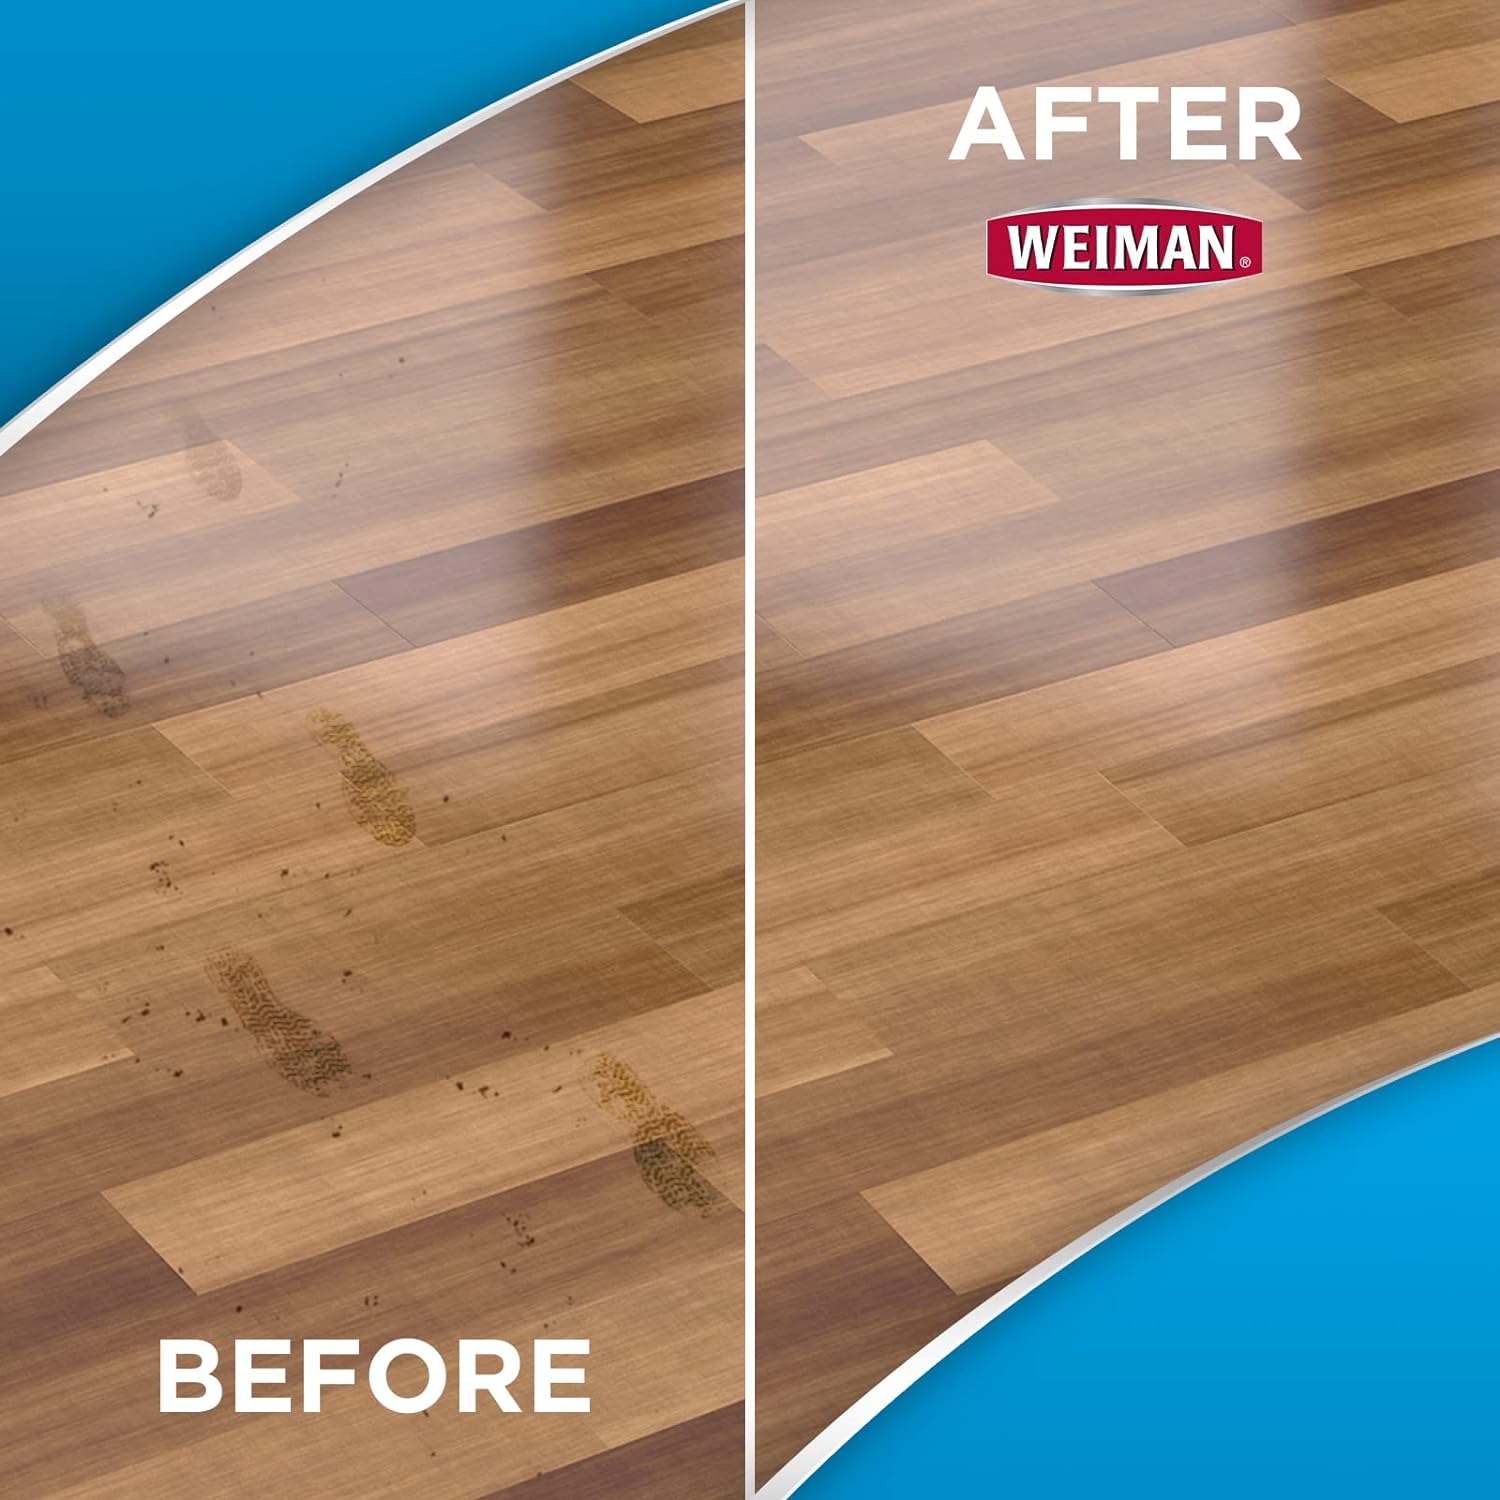 Weiman Hardwood Floor Cleaner Gallon and Refillable Squeeze Bottle - Finished Wood Surfaces : Health & Household